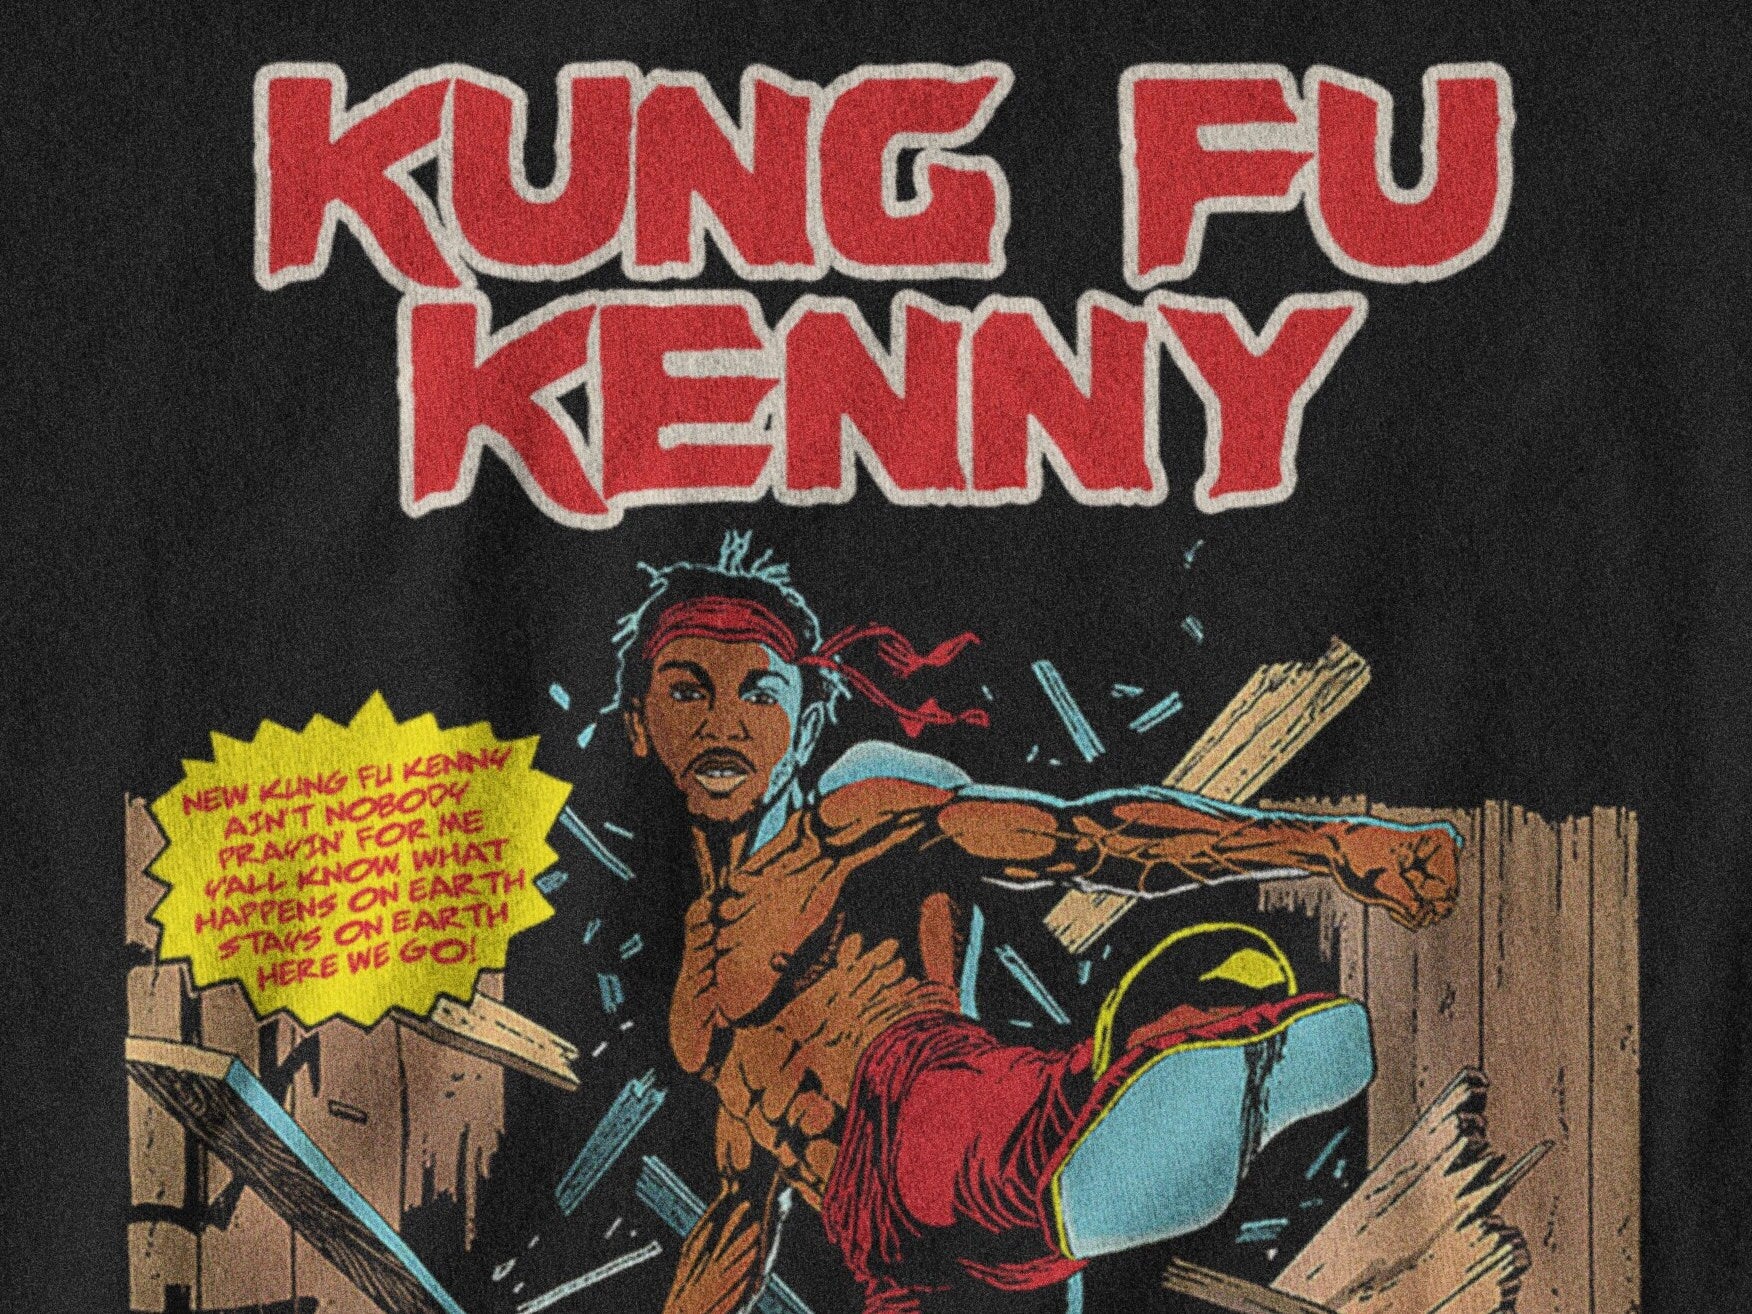 Kendrick Lamar Inspired Kung Fu Kenny Graphic Tee Vintage 90's Comic Style T-Shirt